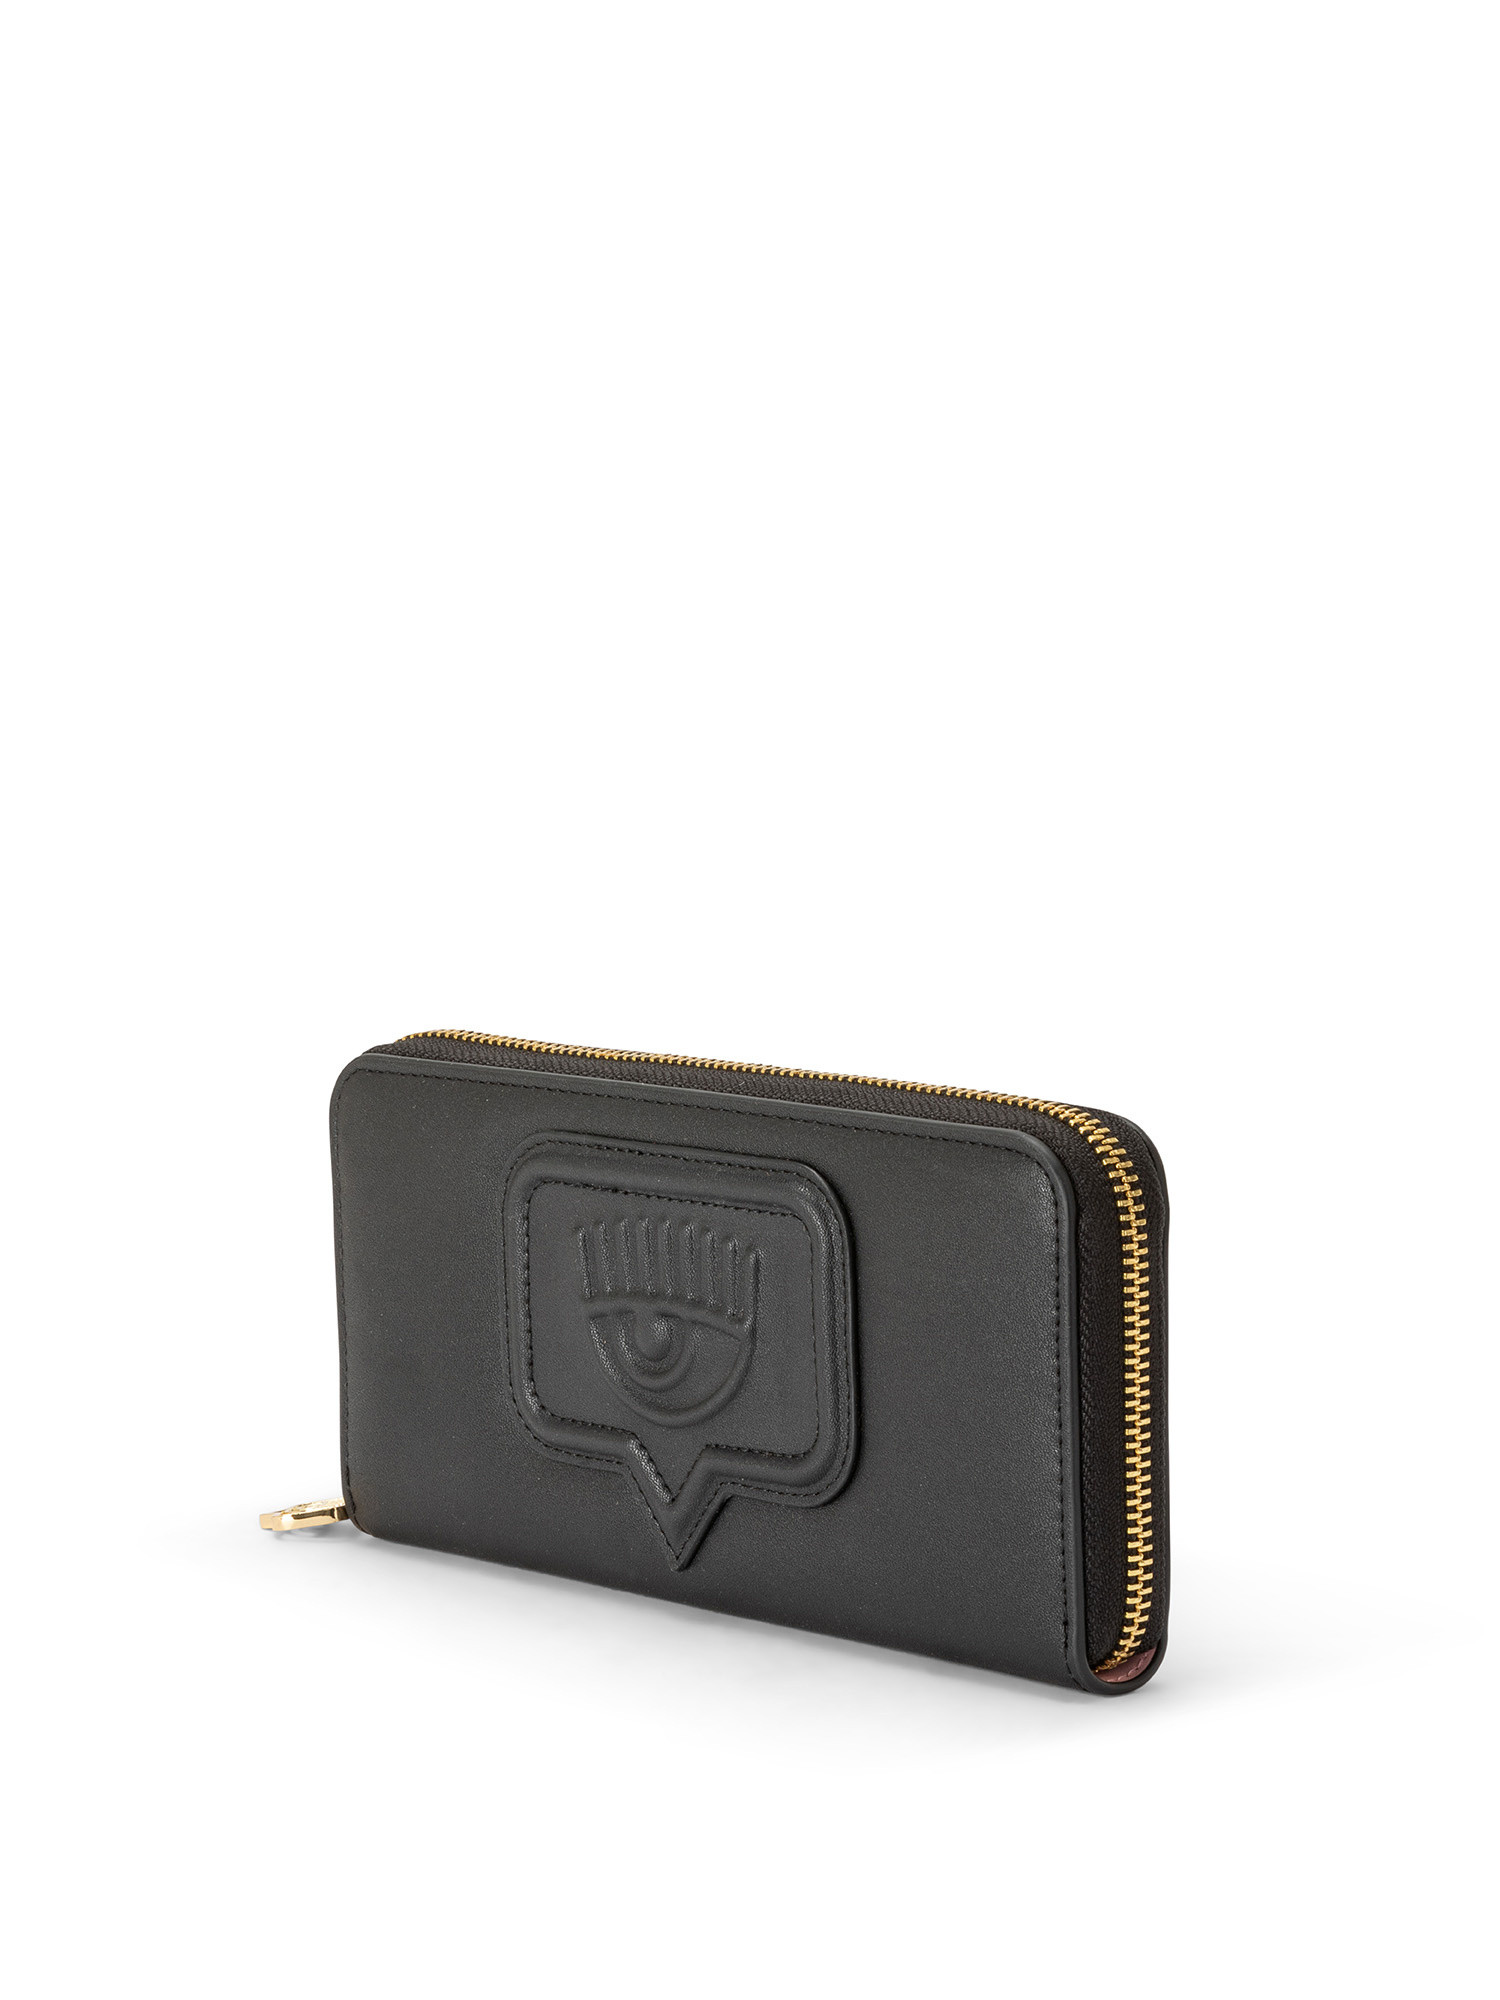 Wallet in faux leather, Black, large image number 1